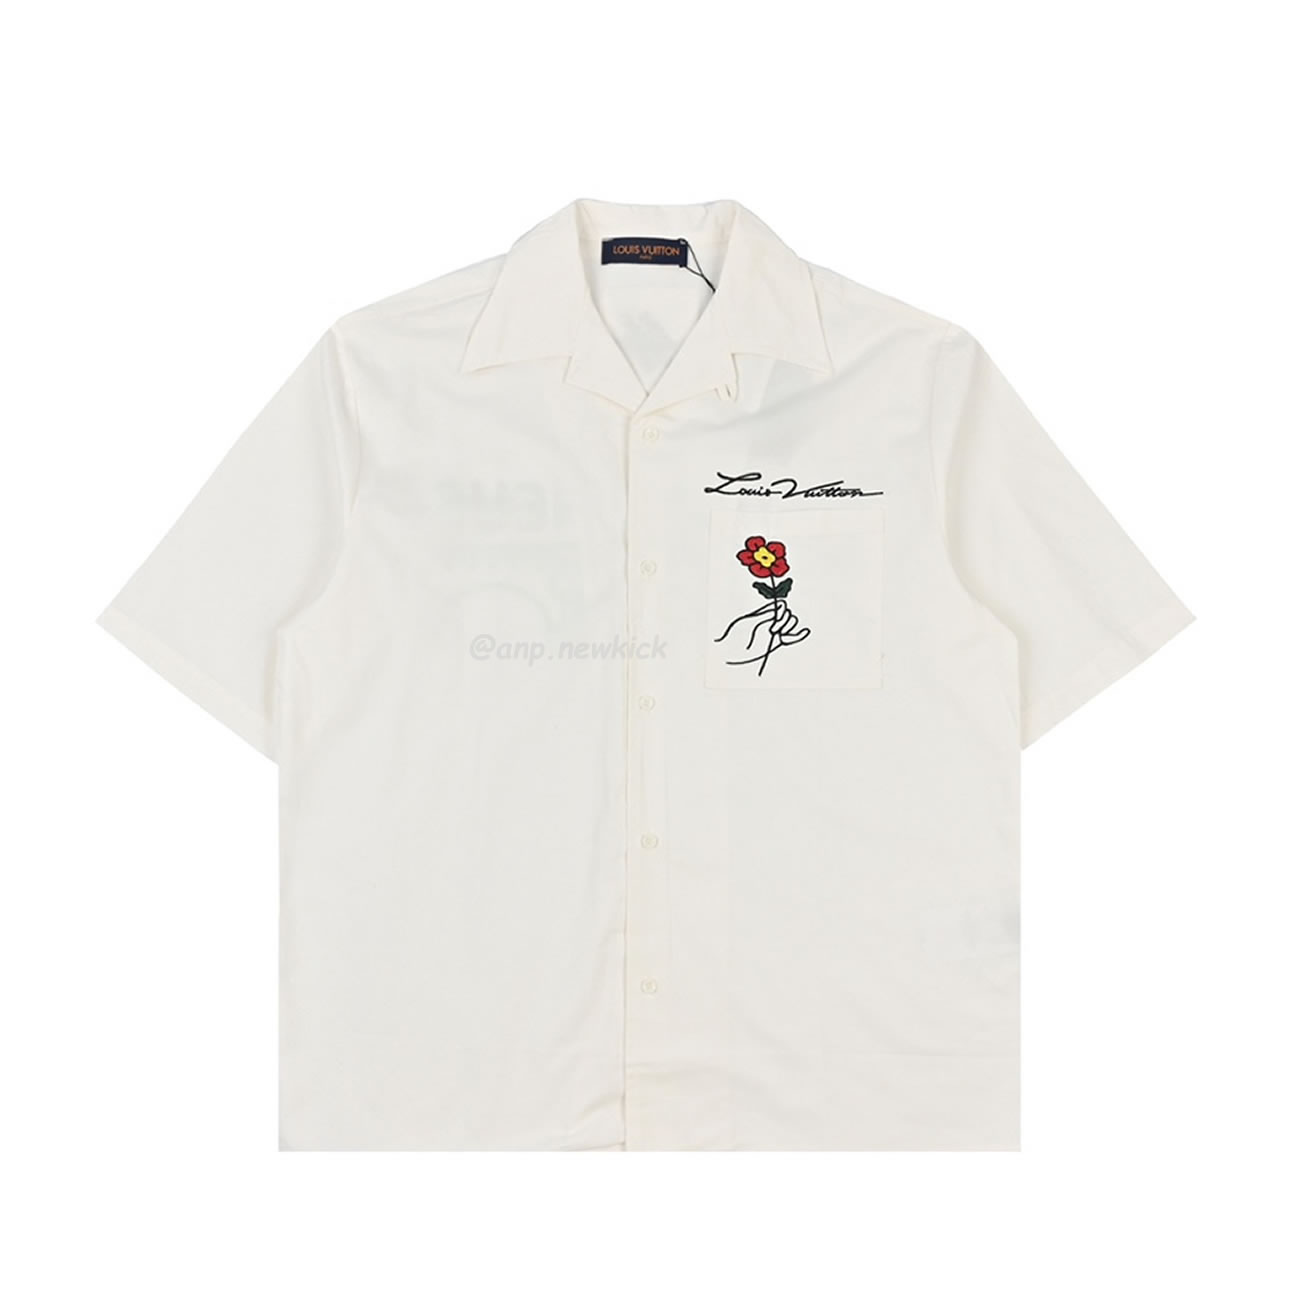 Louis Vuitton 1v 24ss Embroidered Short Sleeved Shirts On The Banks Of The Bridge Seine River Flower (1) - newkick.org